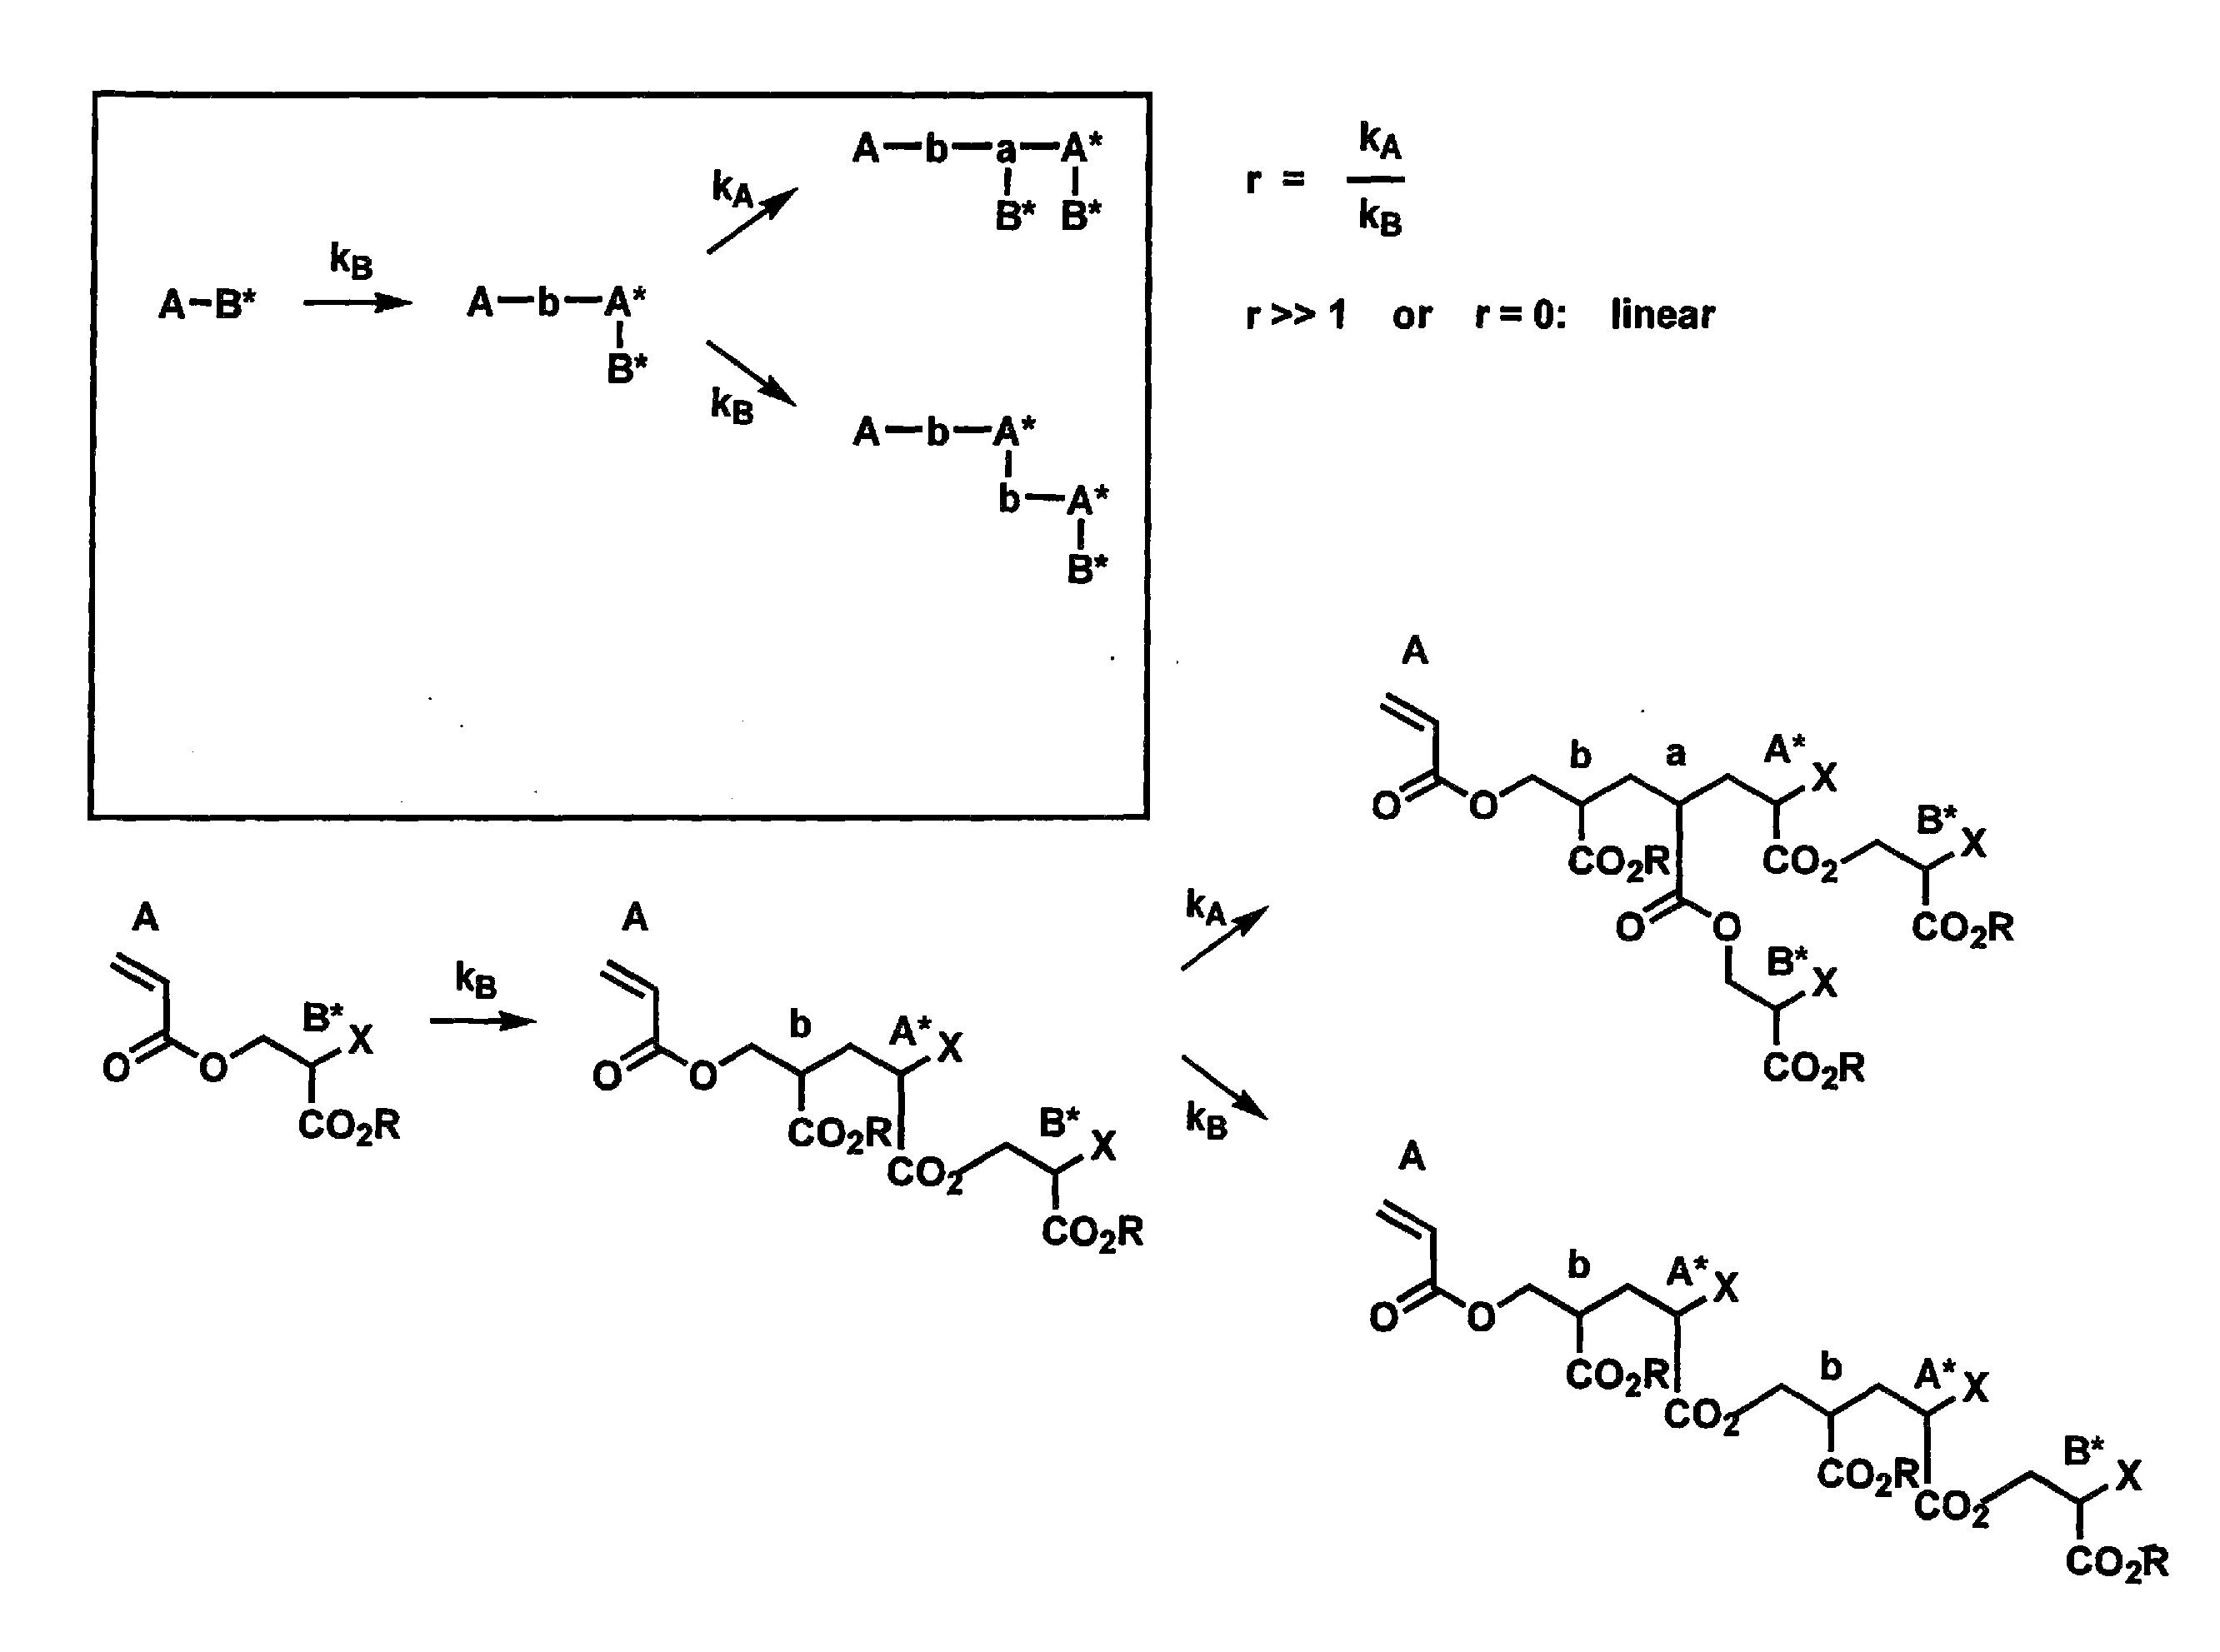 Synthesis of hyperbranched polyacrylates by emulsion polymerizsation of inimers